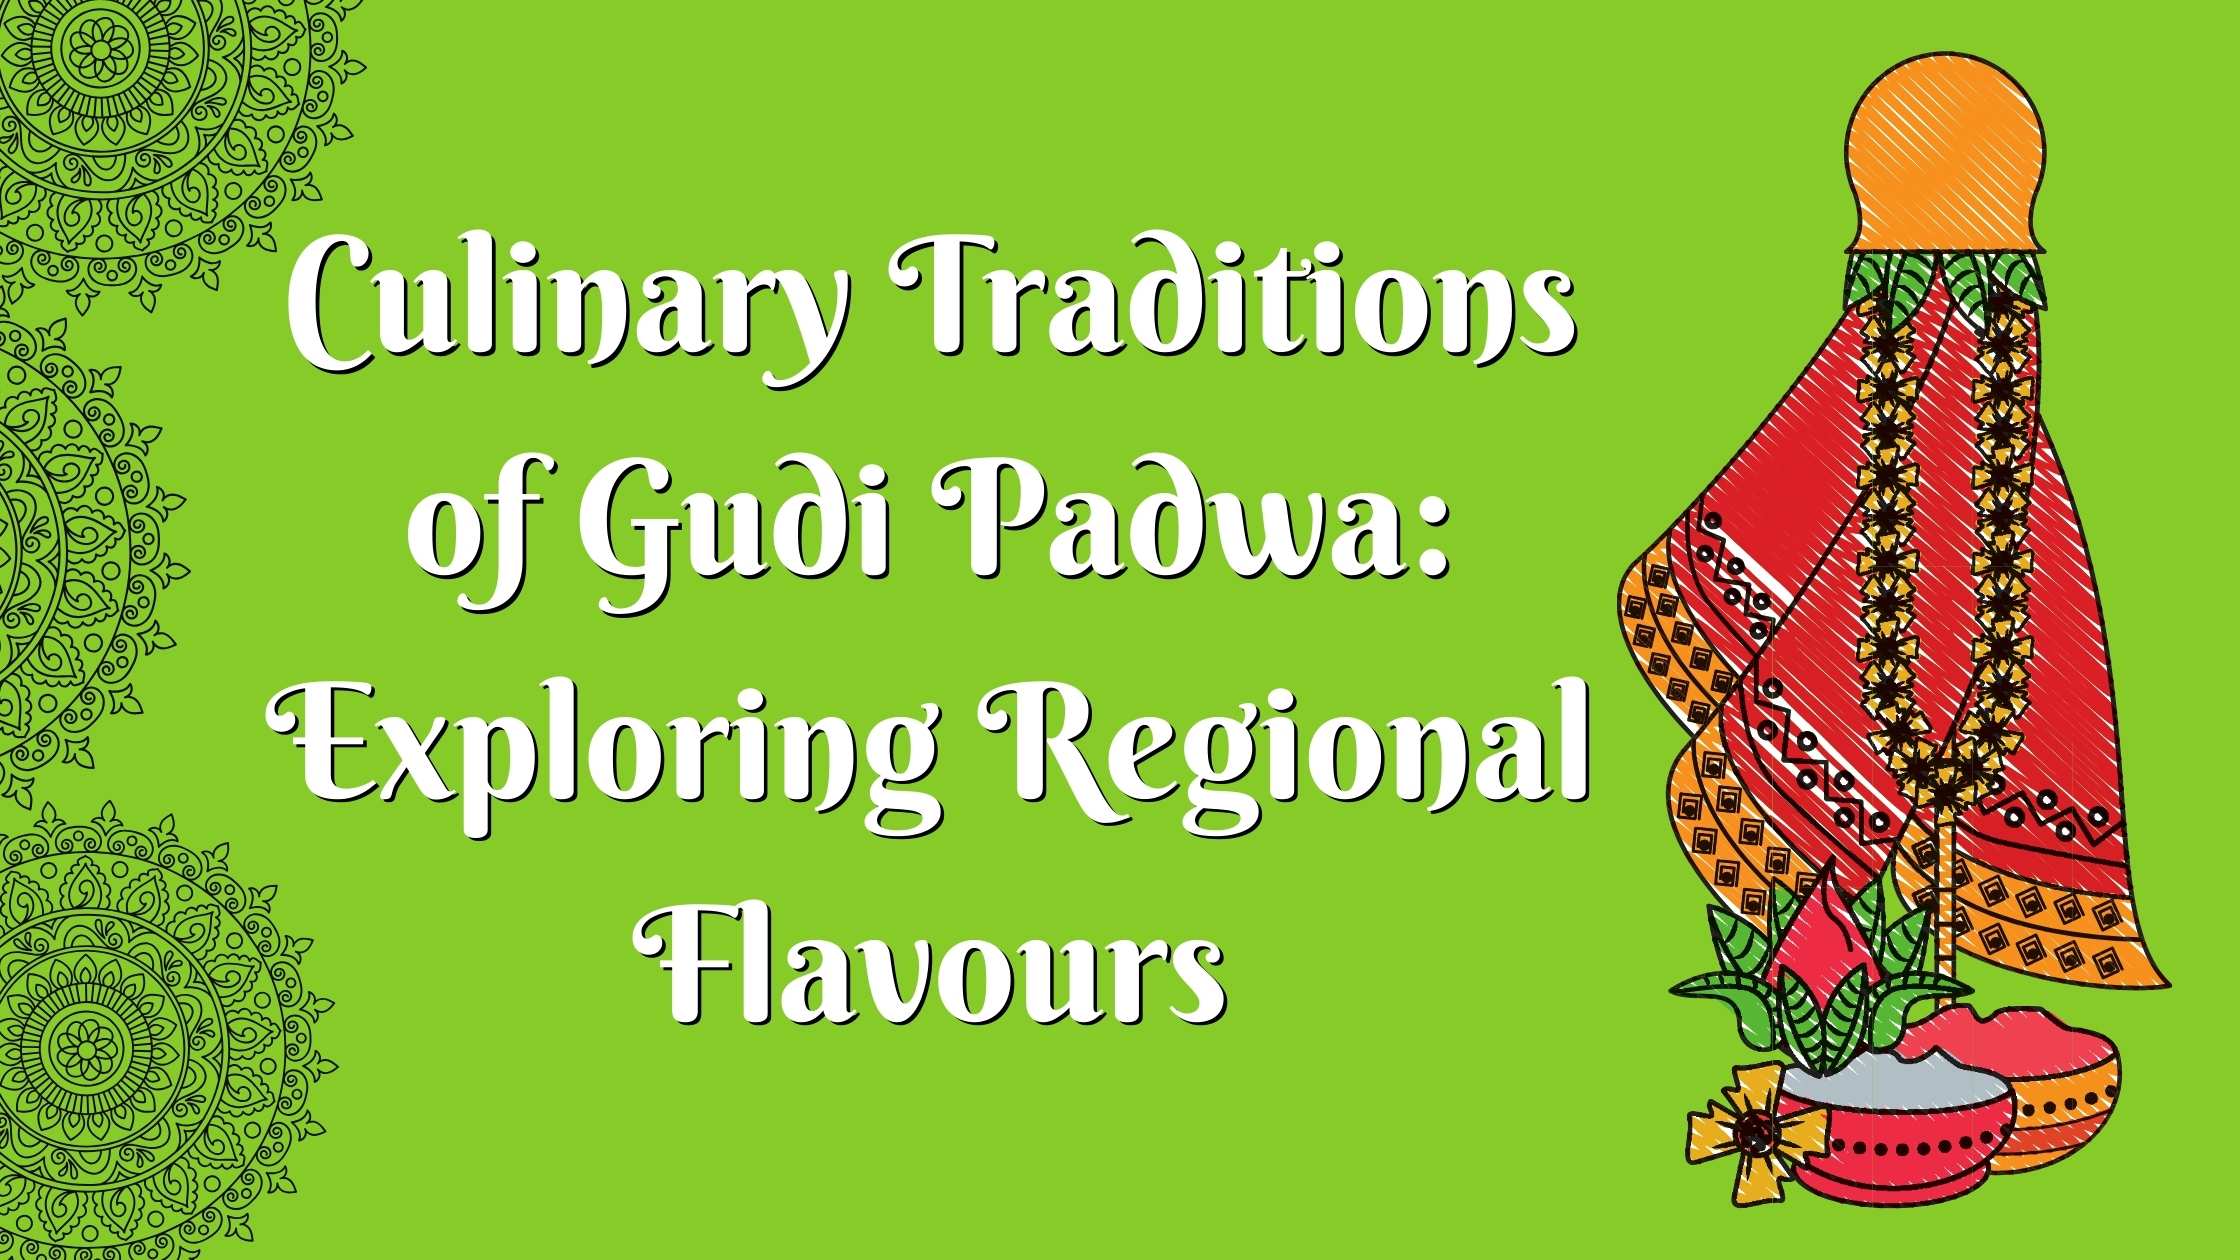 Culinary Traditions of Gudi Padwa: Exploring Regional Flavours